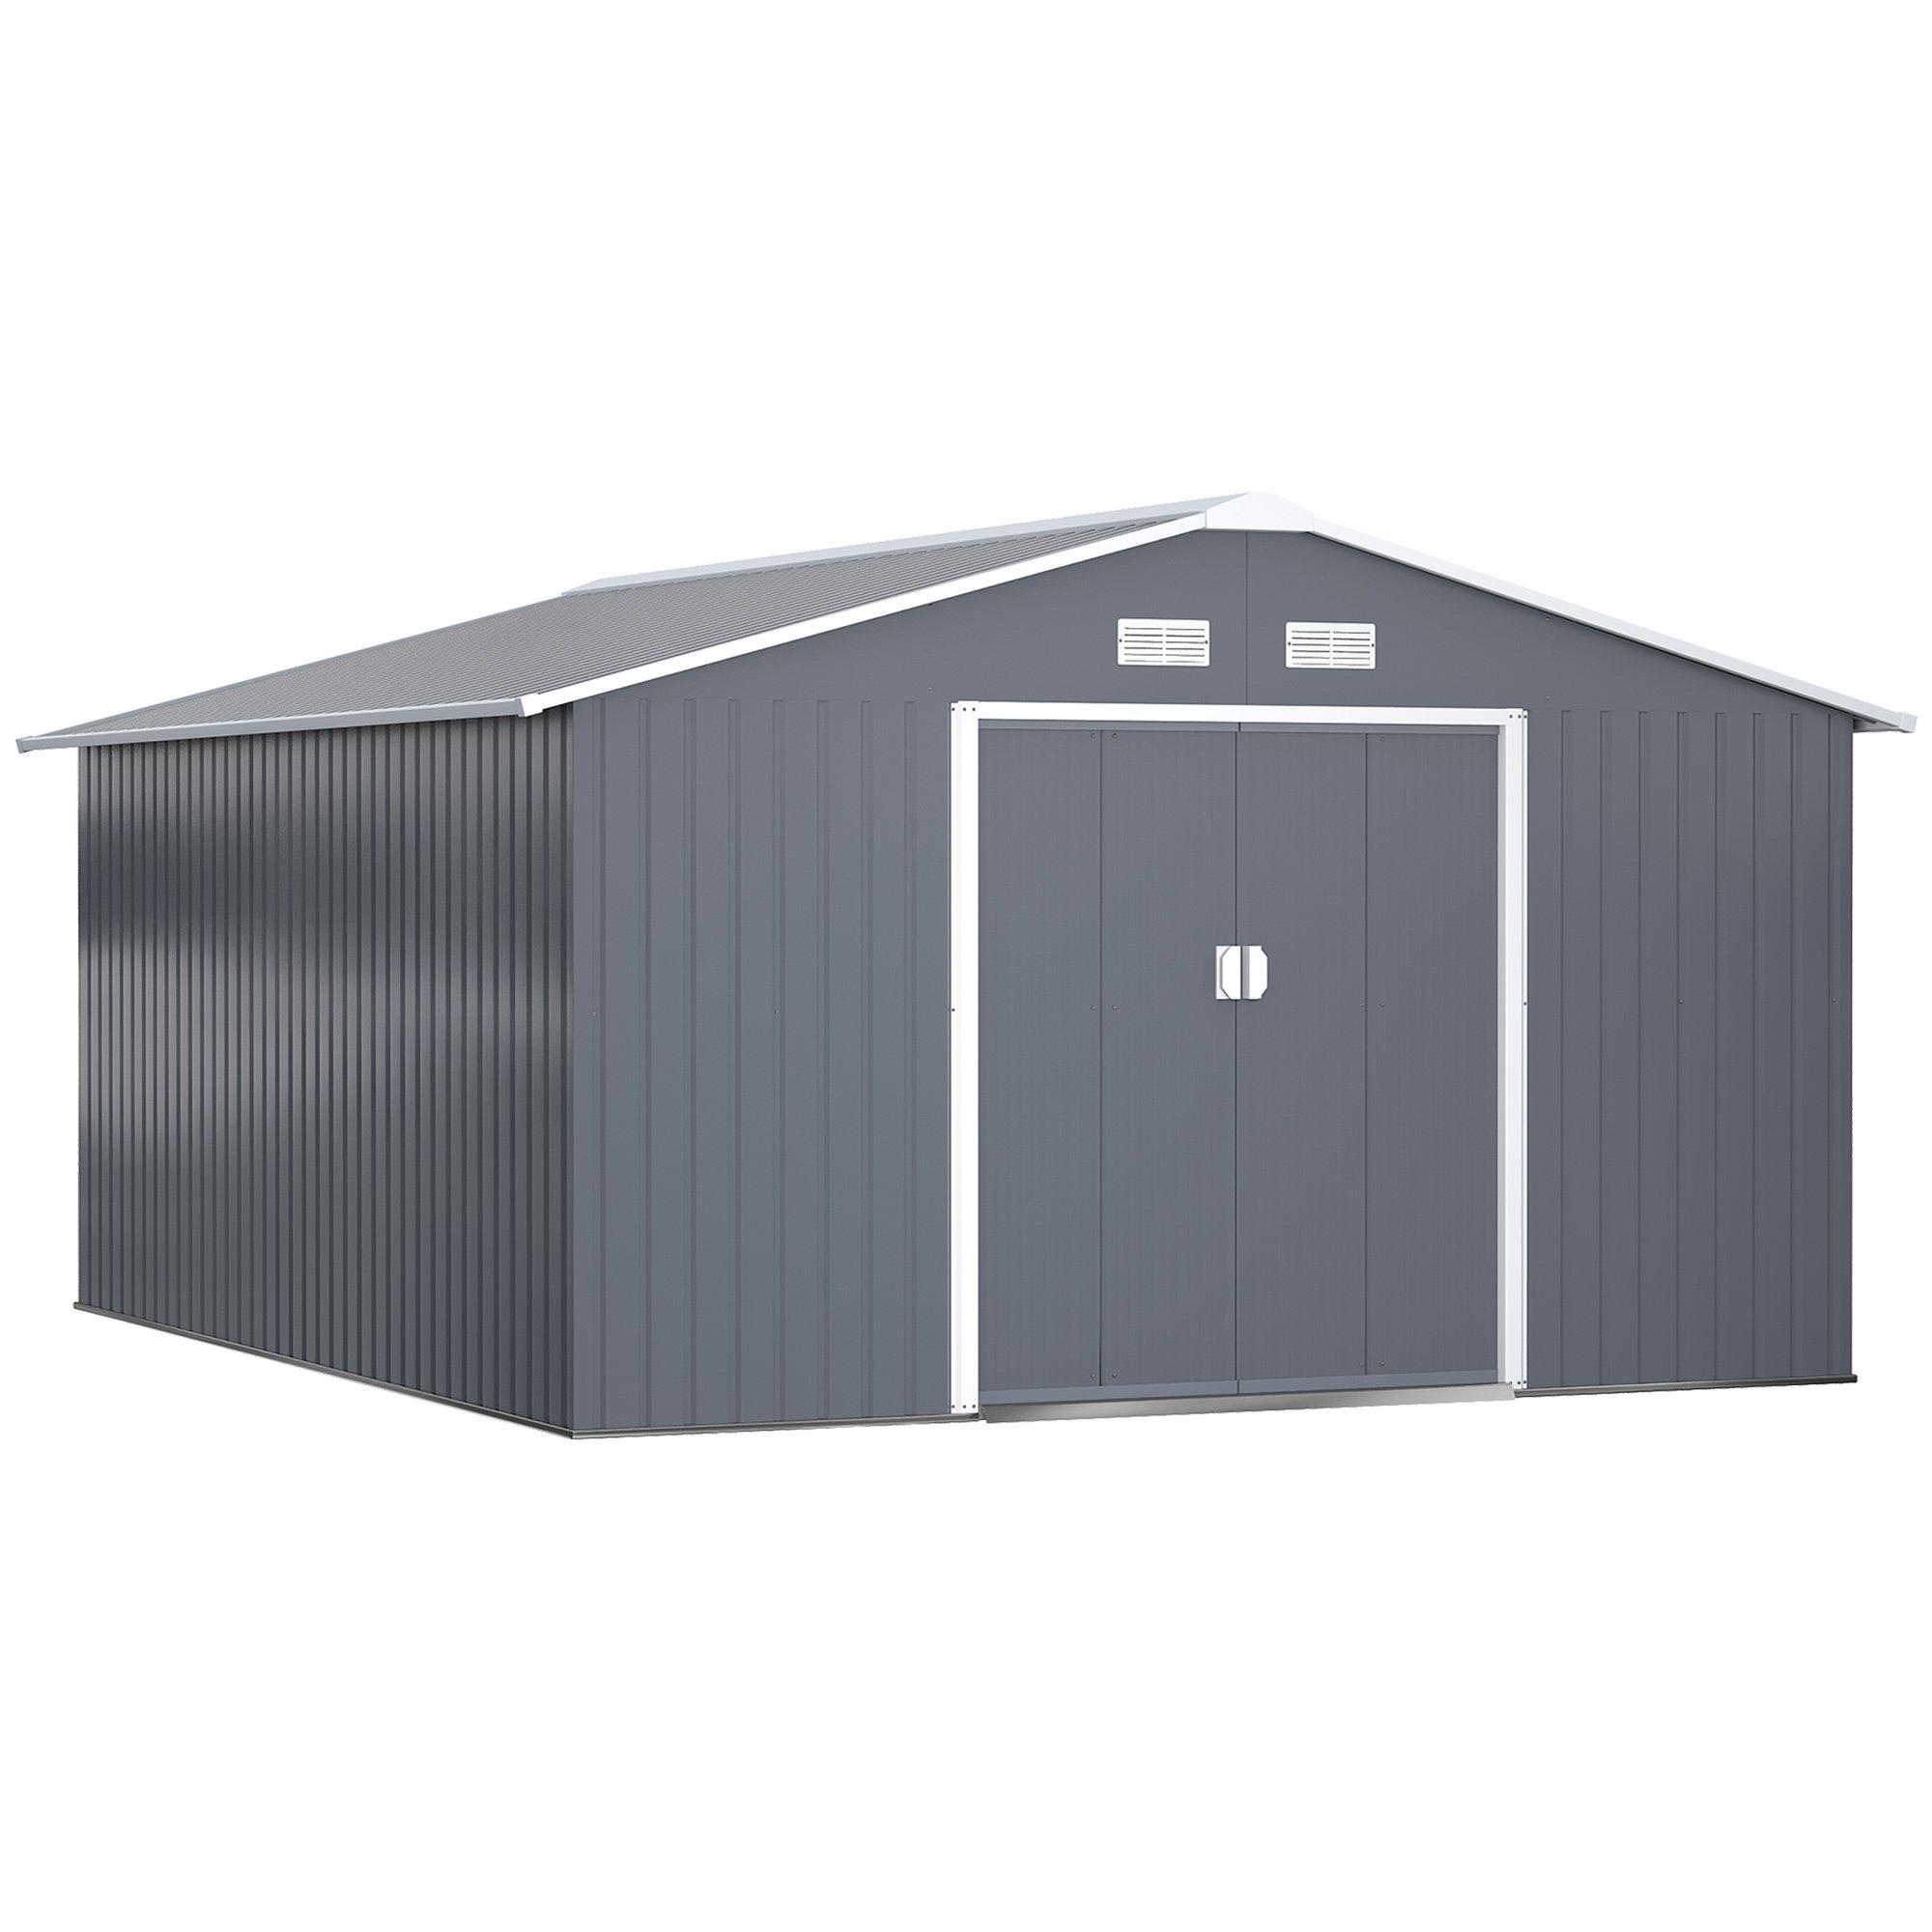 Outsunny 13 X 11ft Outdoor Garden Storage Shed w/2 Doors Galvanised Metal